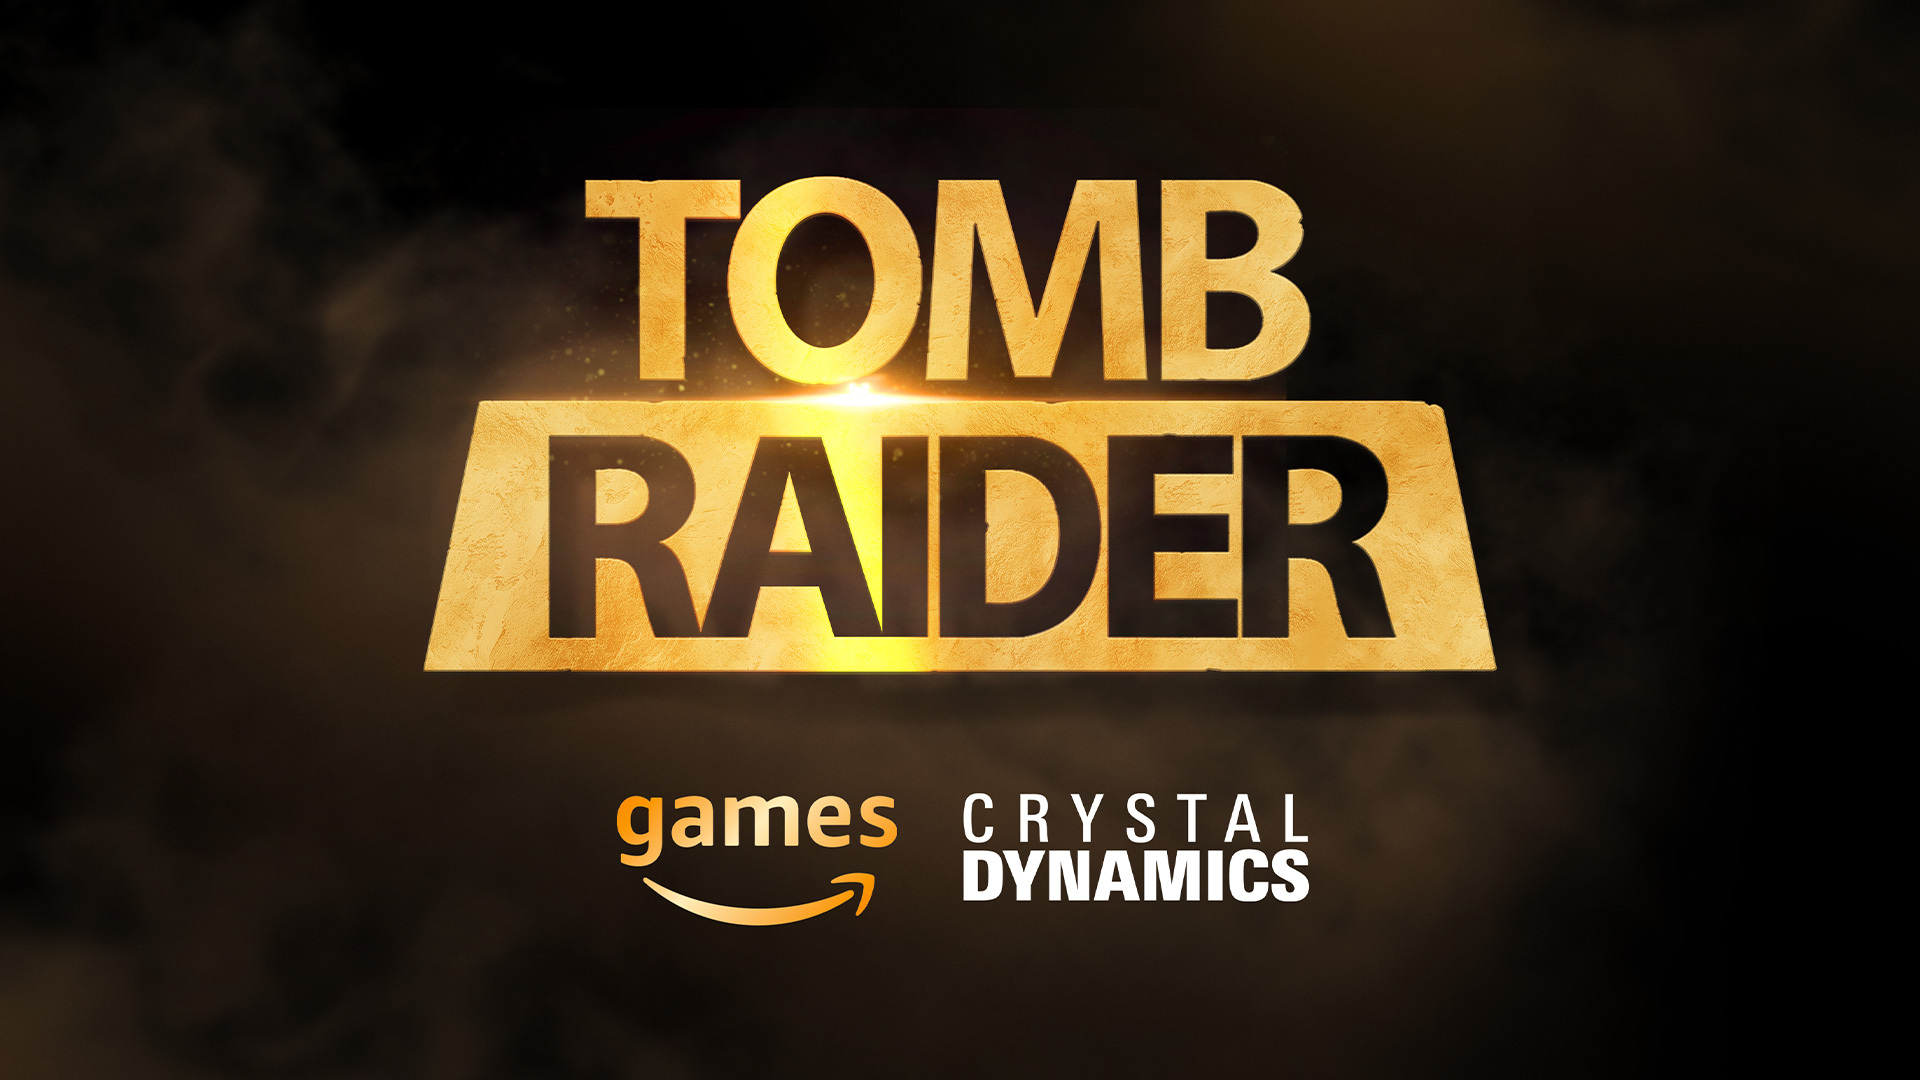 Crystal Dynamics' next Tomb Raider game will be published by Amazon Games